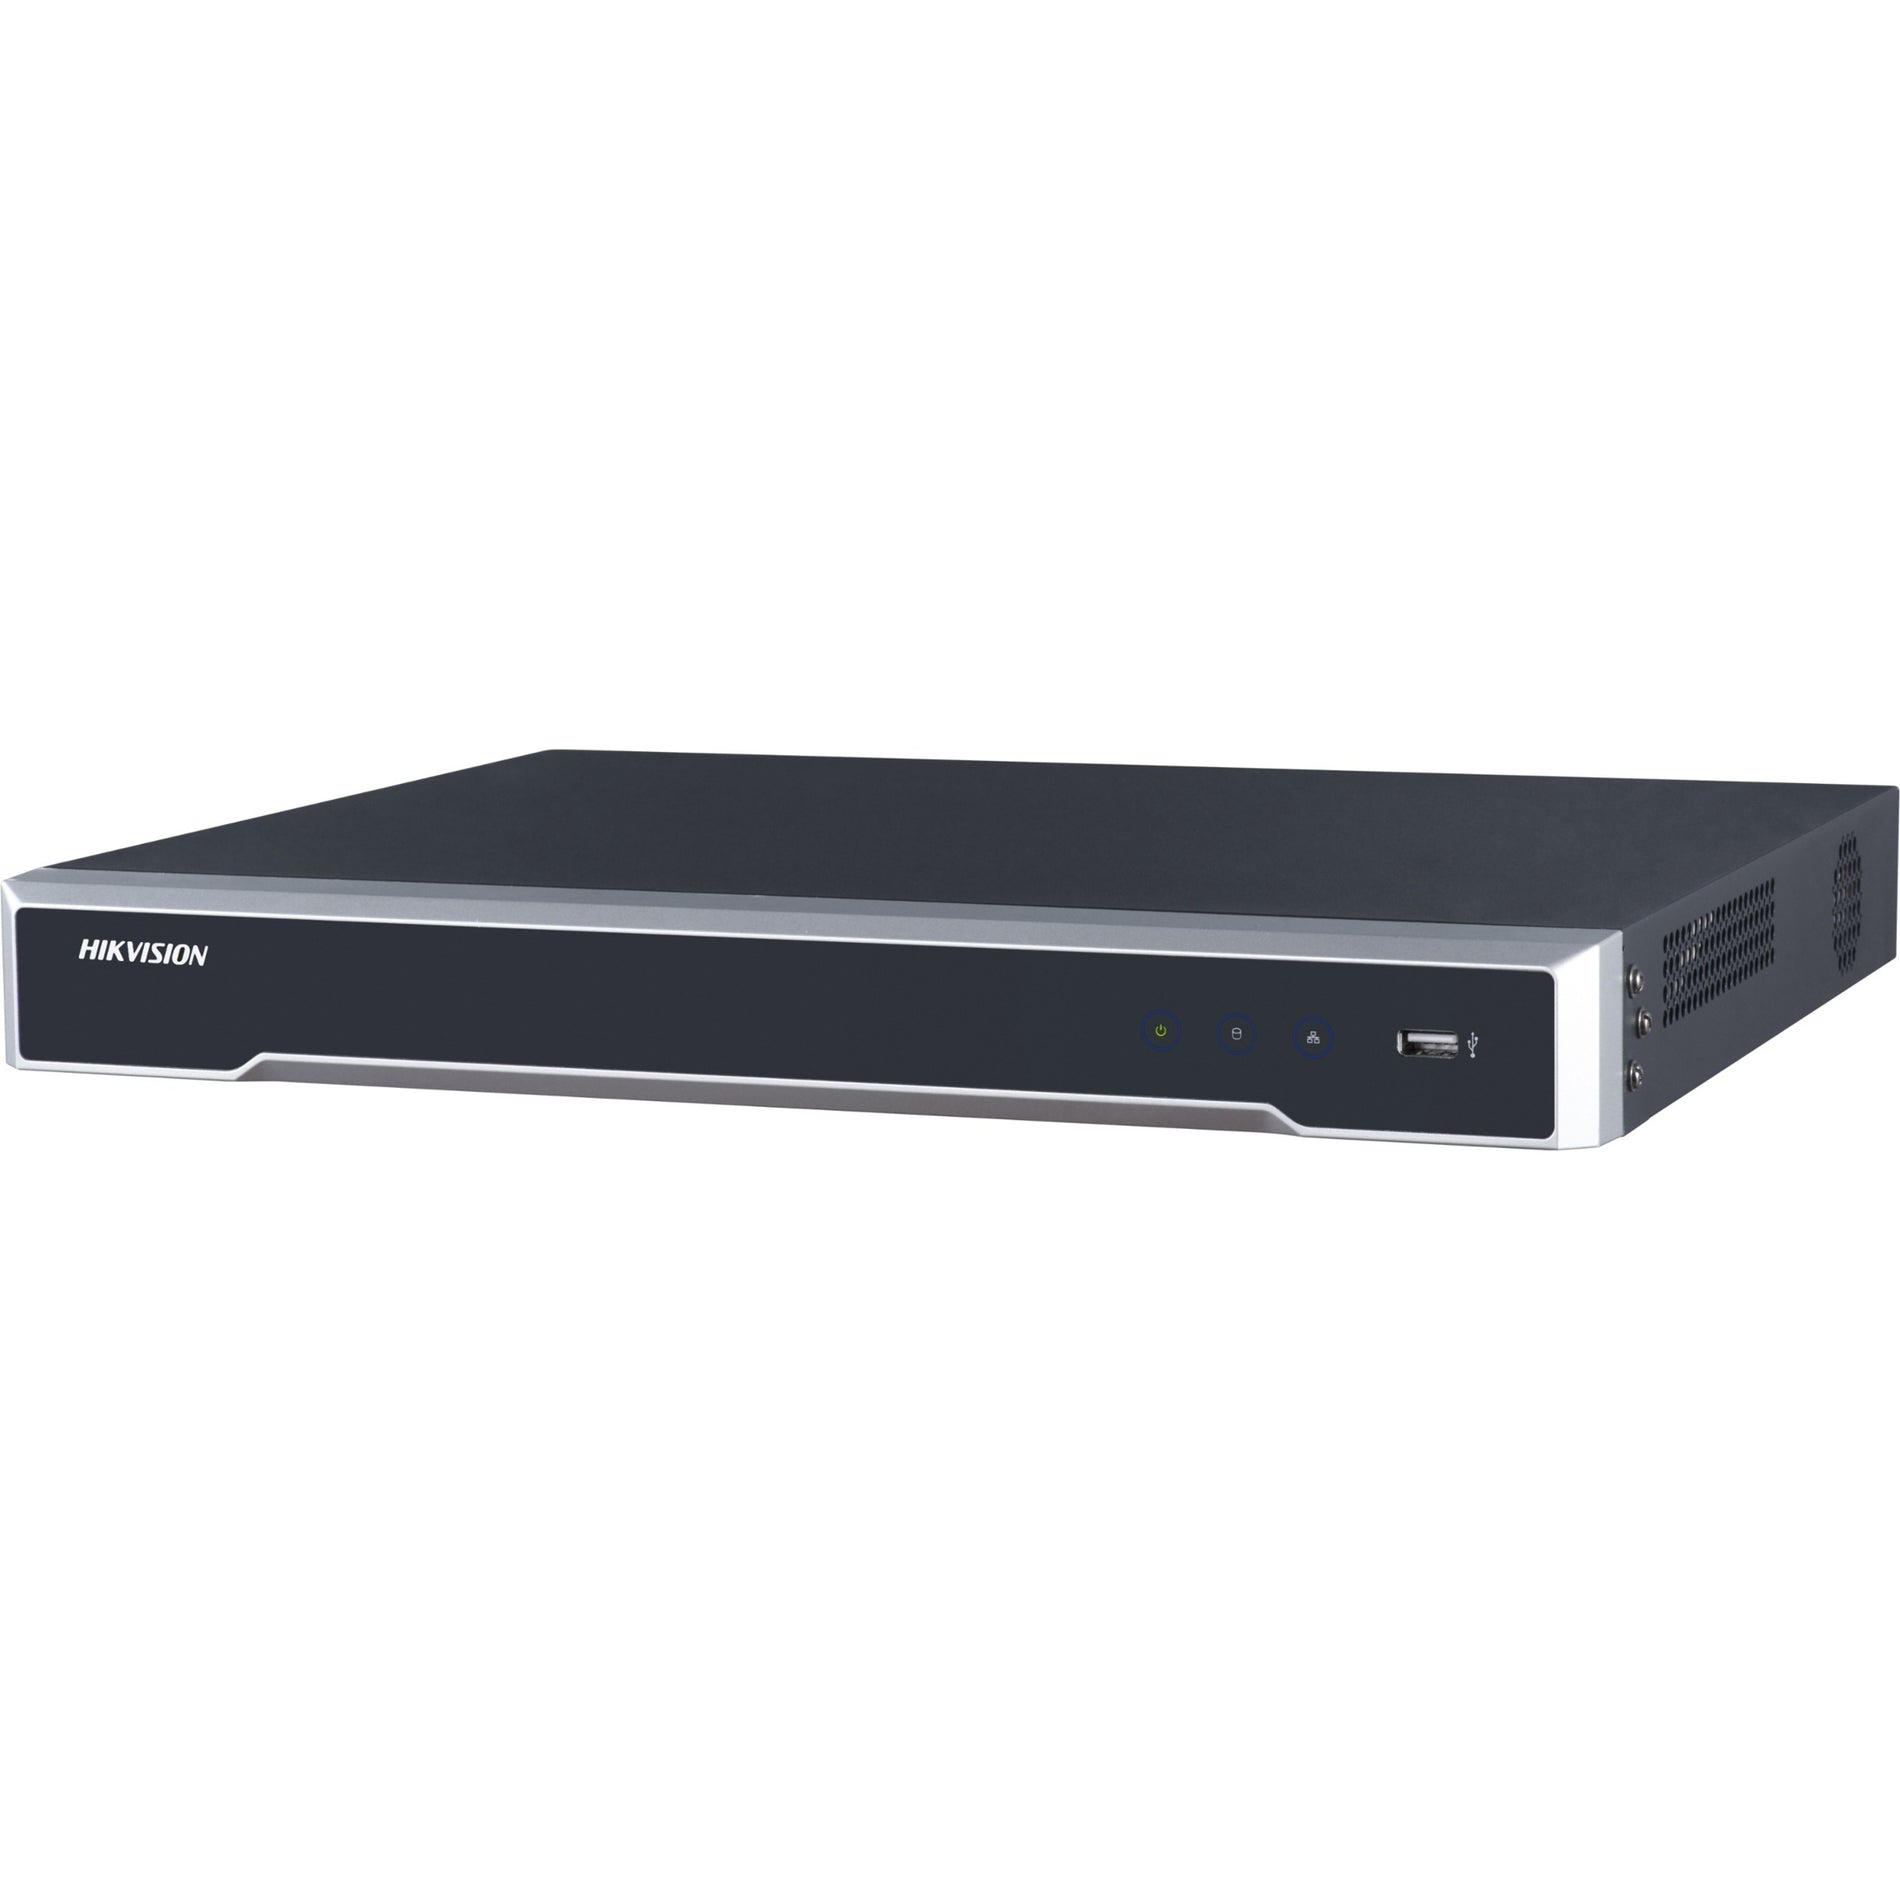 Hikvision DS-7608NI-Q2/8P-2TB 4K Plug and Play Network Video Recorder with PoE, 8CH, H.264+, Up to 8MP, 2TB Storage